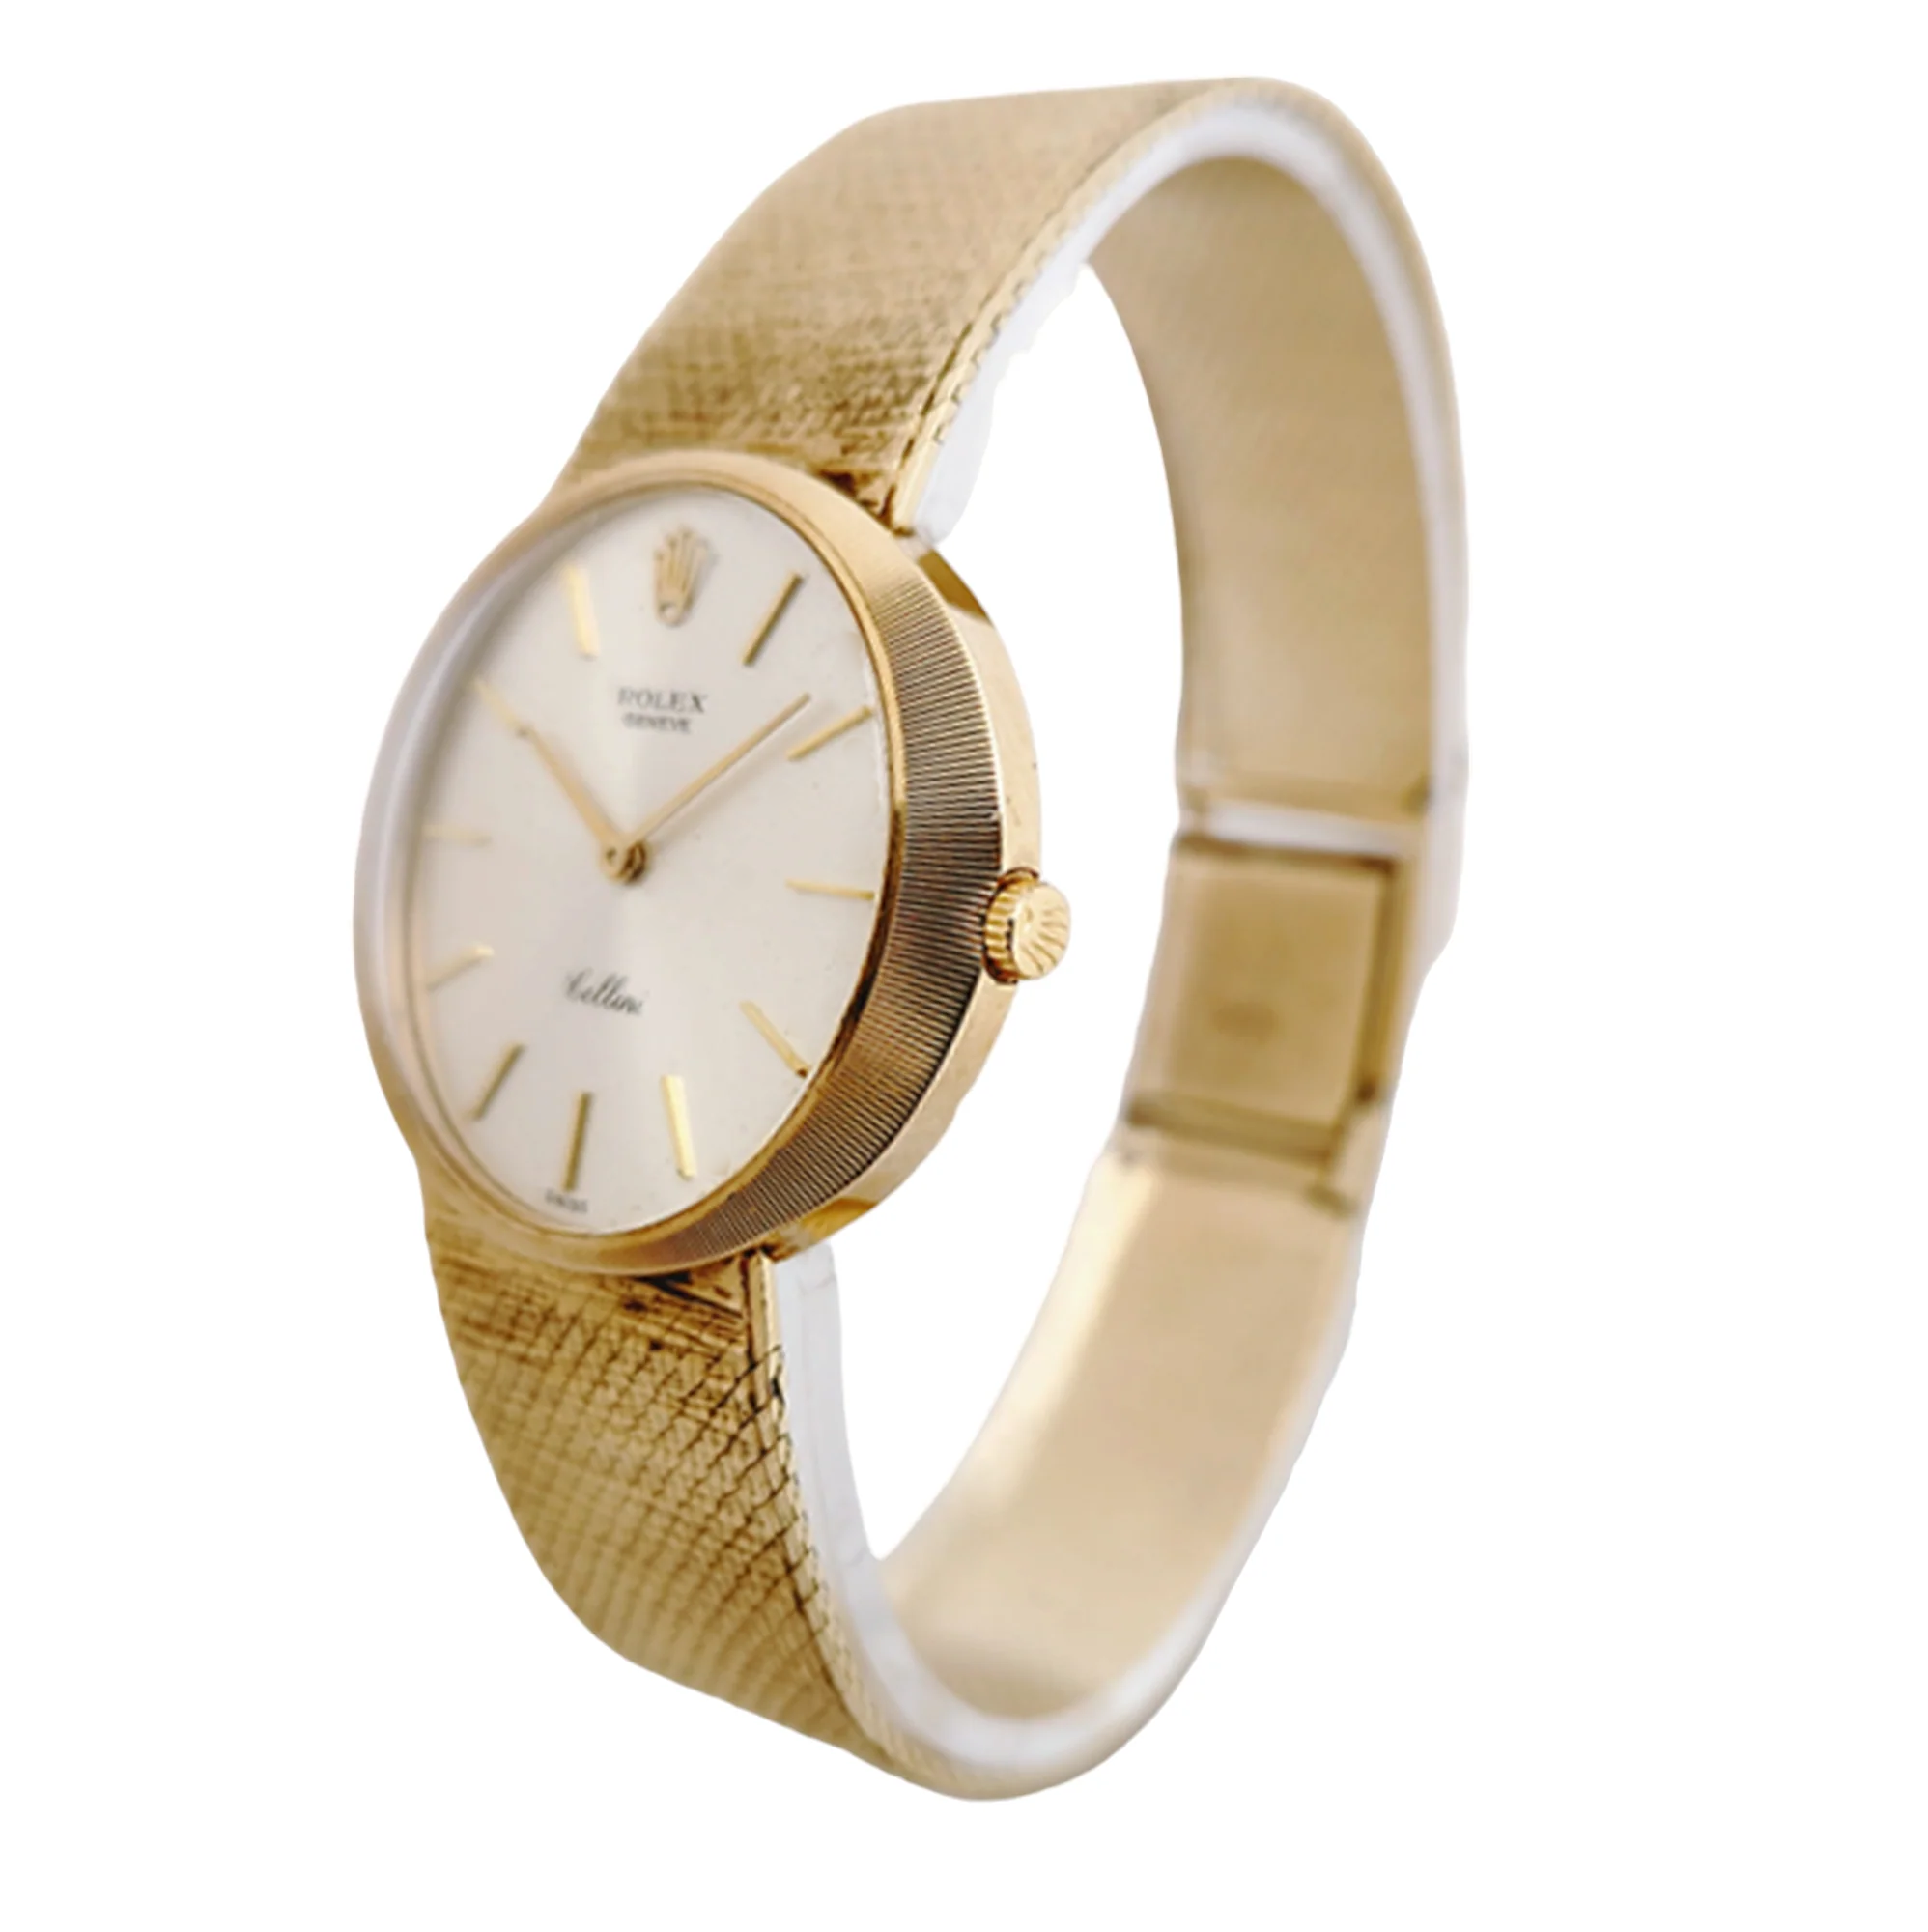 Unisex Rolex Cellini Vintage 14K Yellow Gold Watch with Light Champagne Dial and Smooth Bezel. (Pre-Owned)